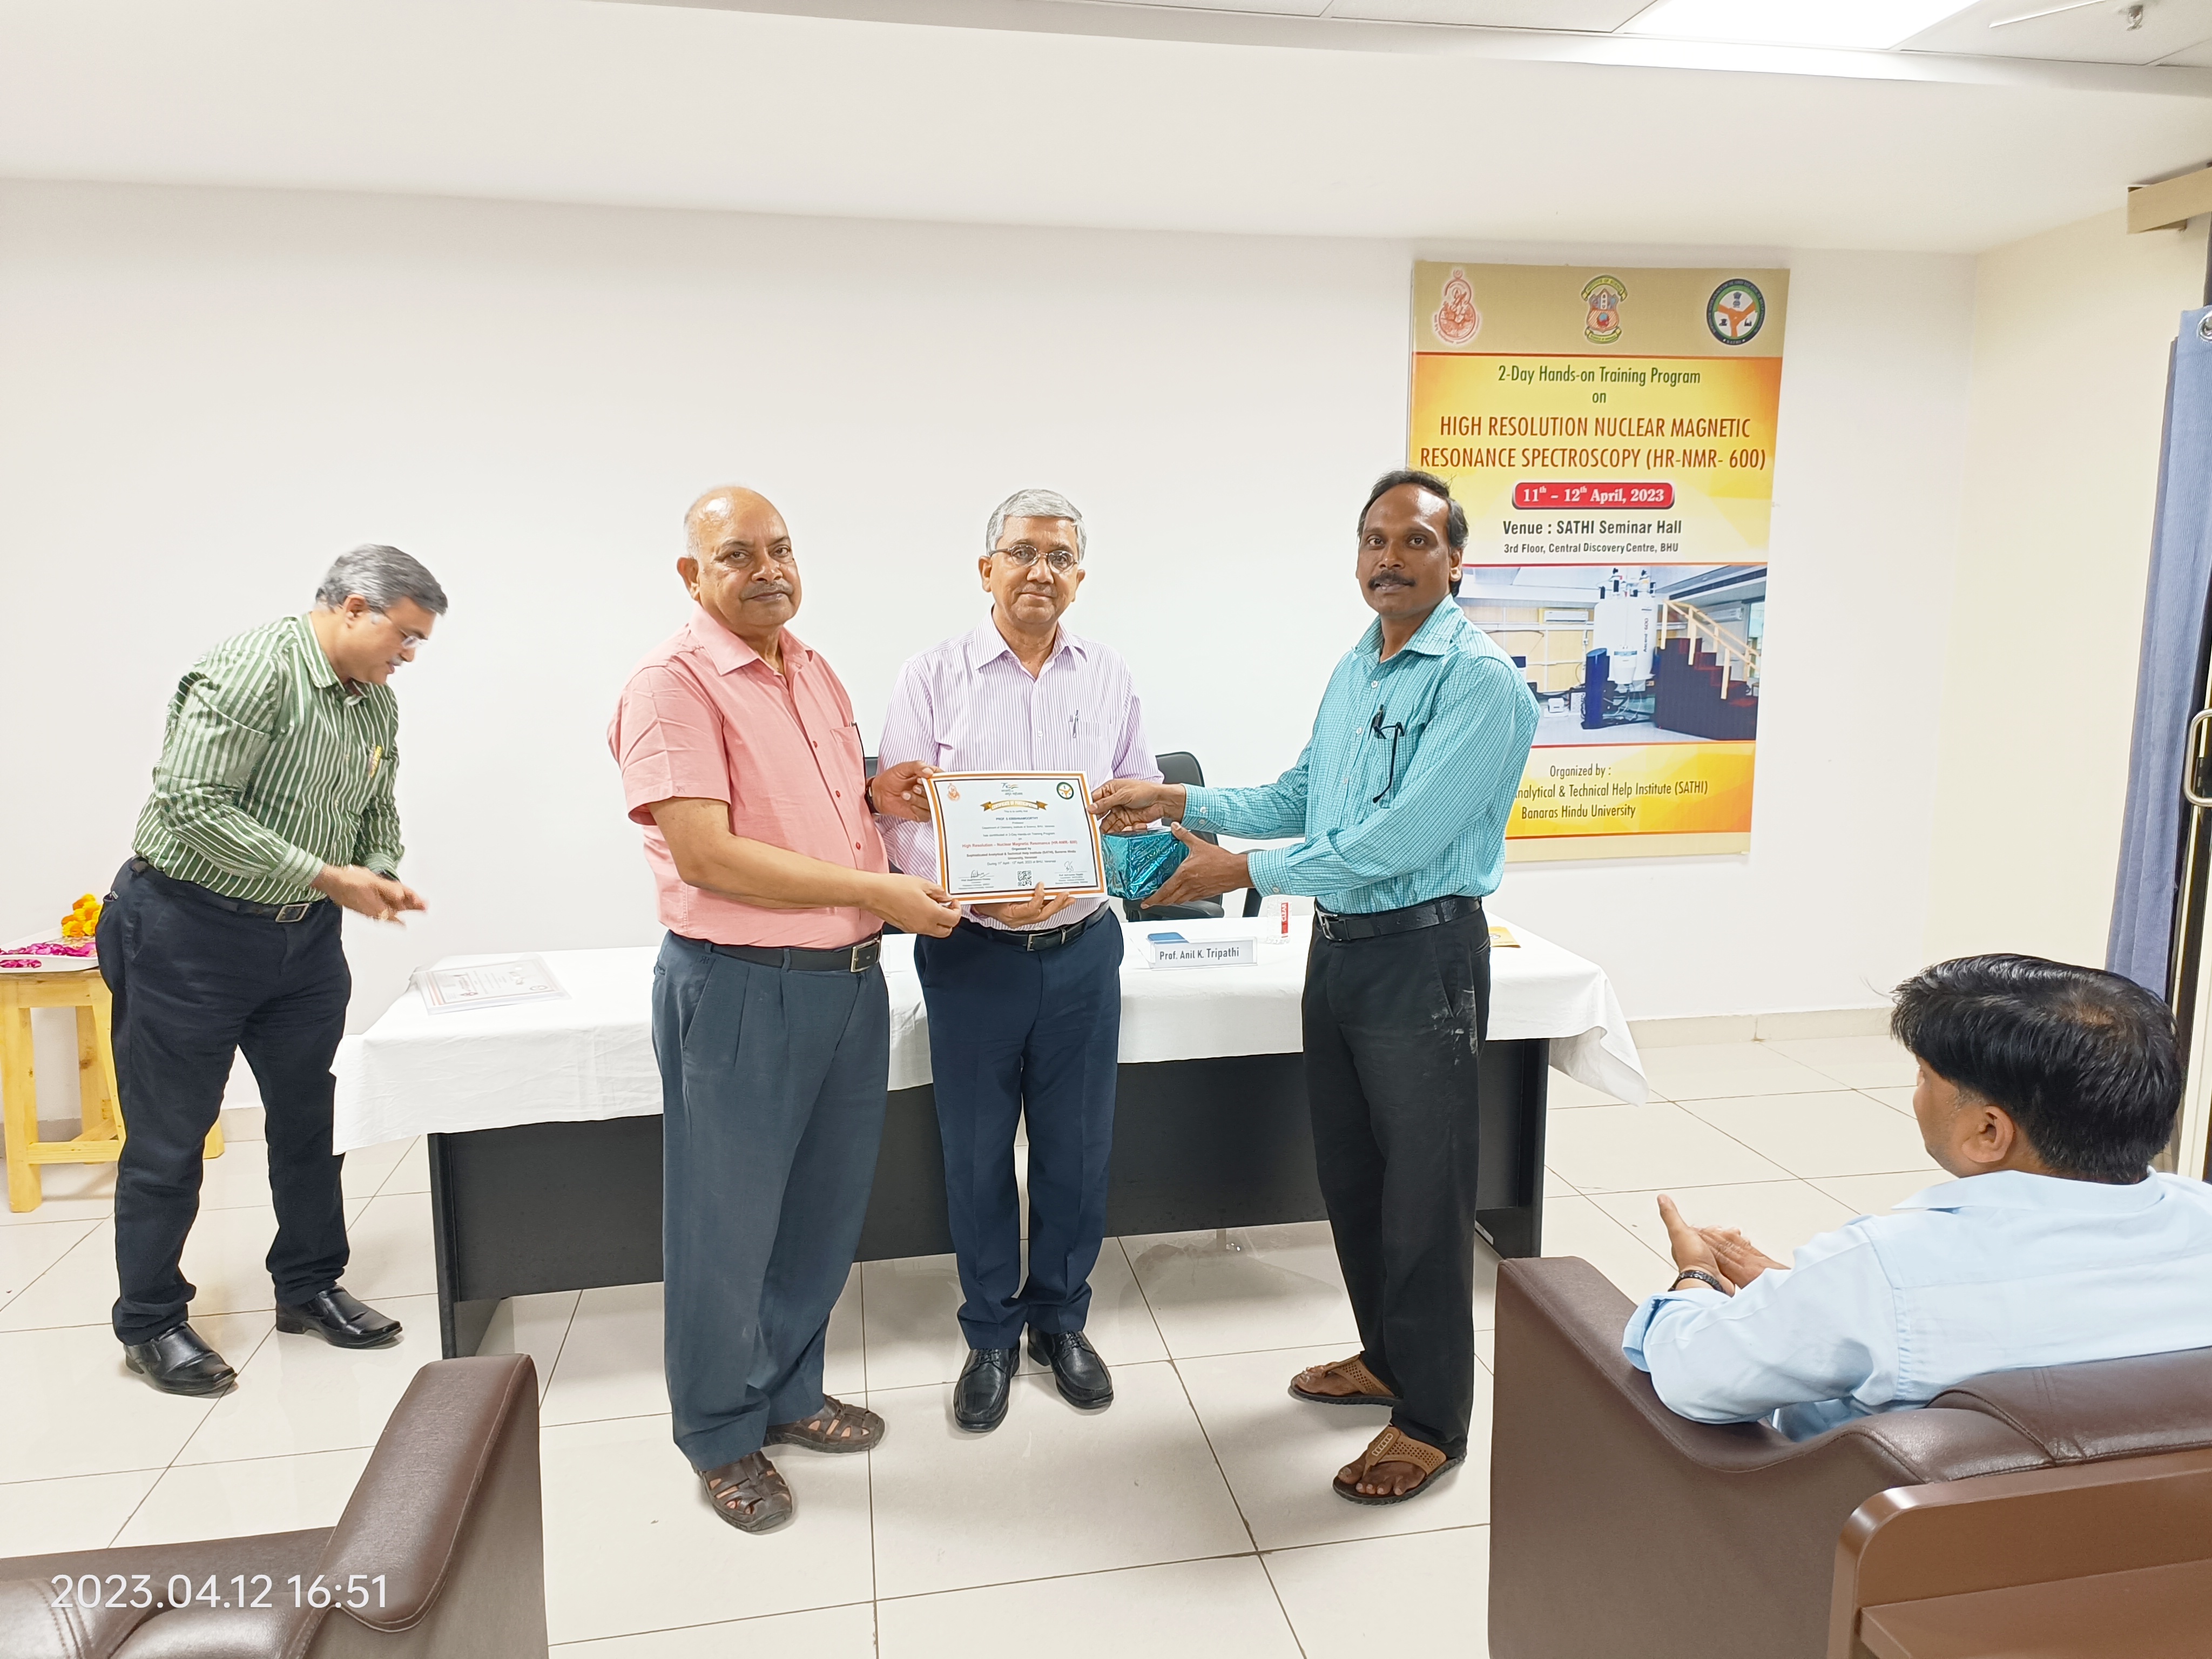 A token memento given to Prof. S. Krishnamoorthy for his contribution as a Resource person by Prof. Anil K. Tripathi, Coordinator, SATHI-BHU & Director, ISc, BHU 